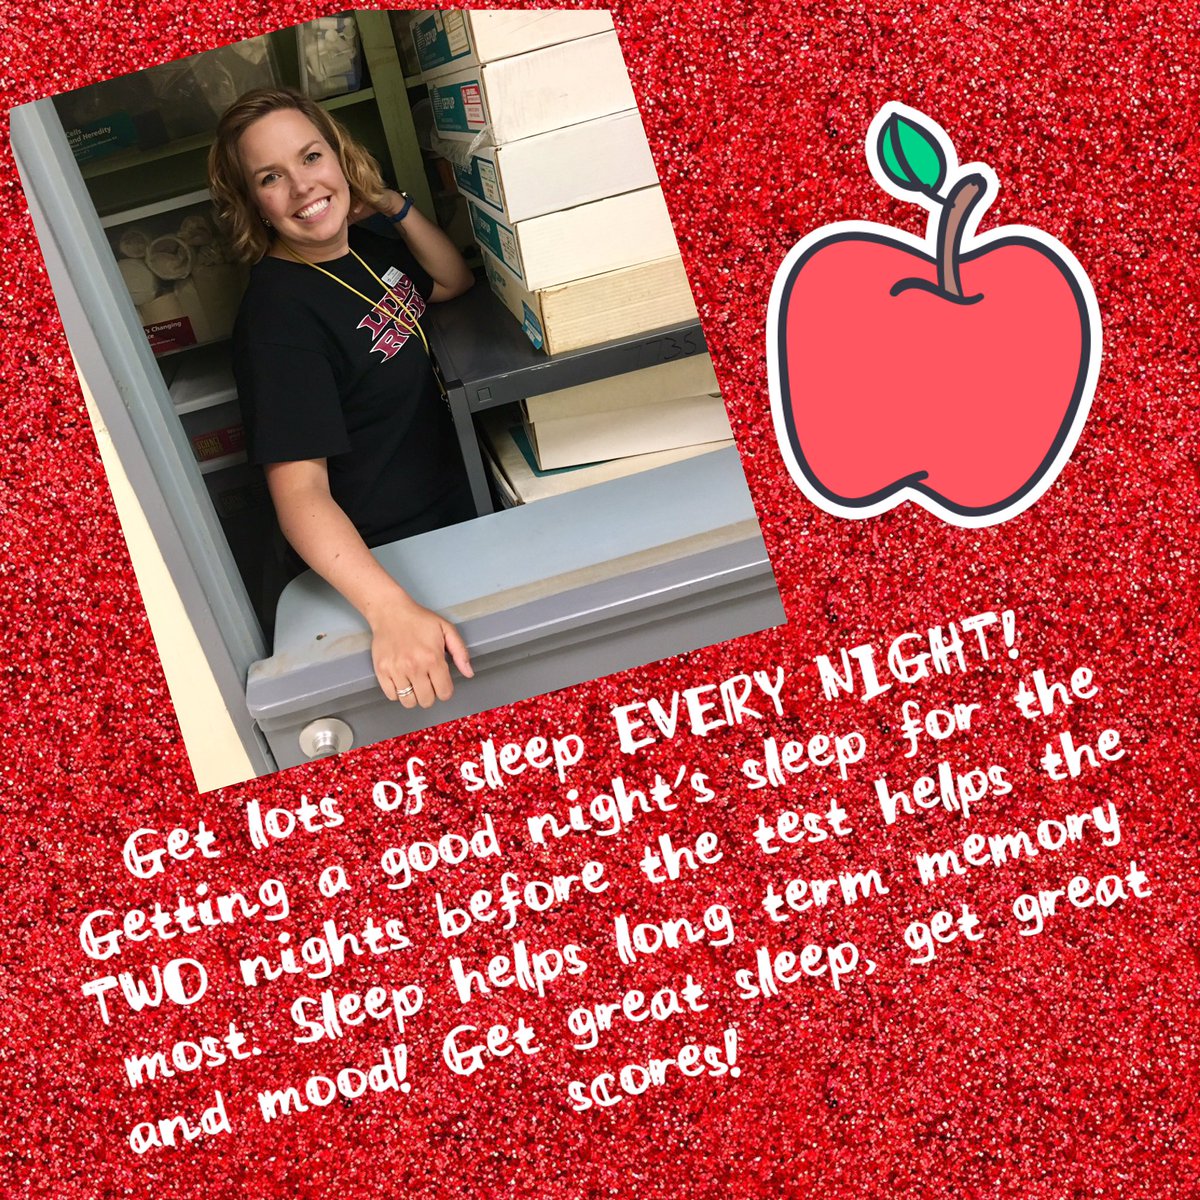 Teacher Test-Taking Tip #1 is brought to you by Mrs. Boggess 😀🍎 #testingtips #lmmsrocks